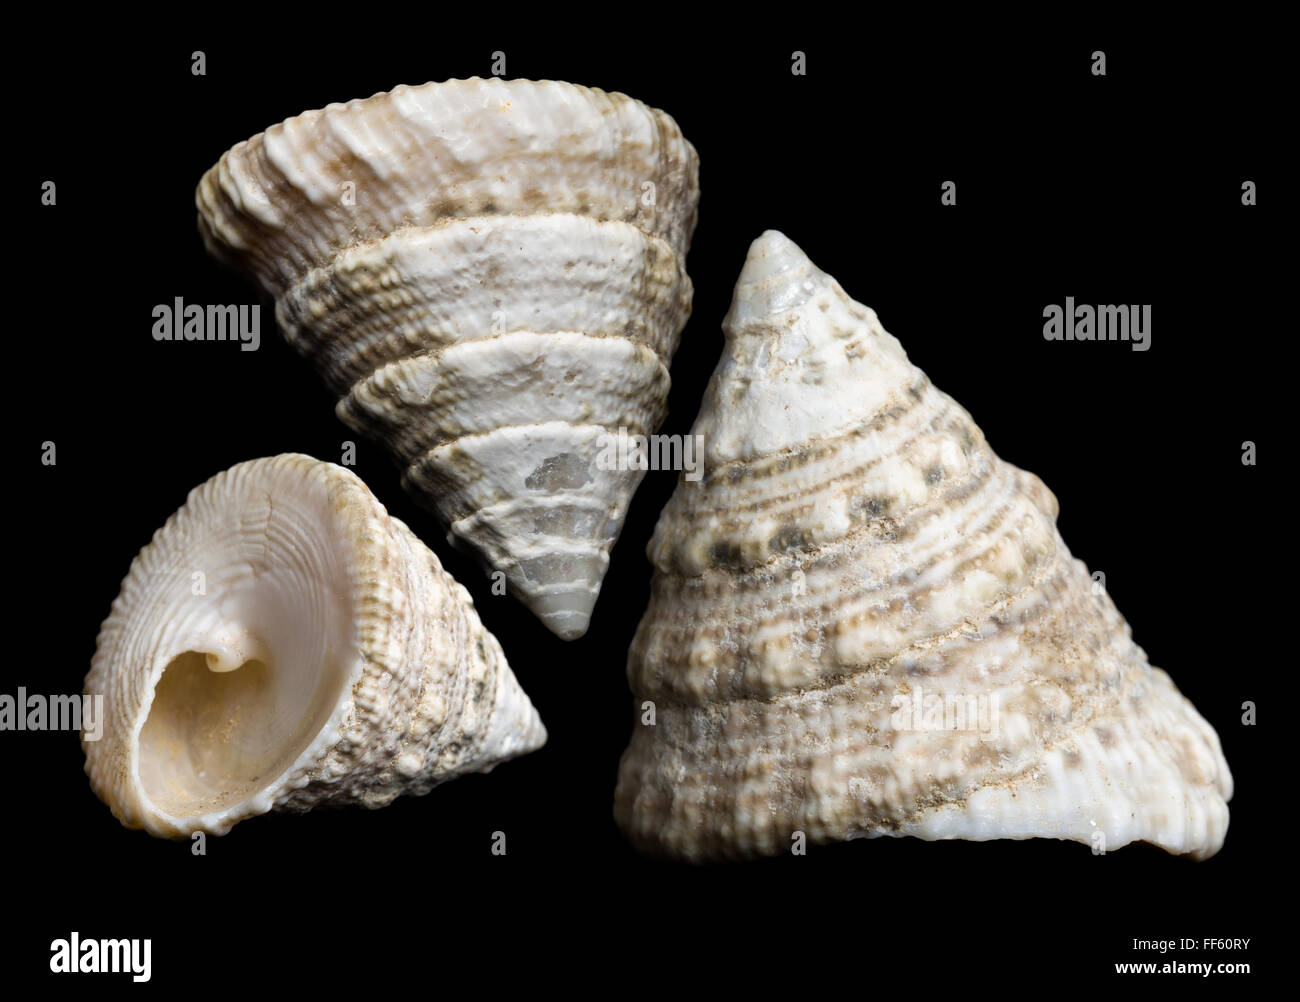 Trochus maculatus seashell front and side view against a black background Stock Photo